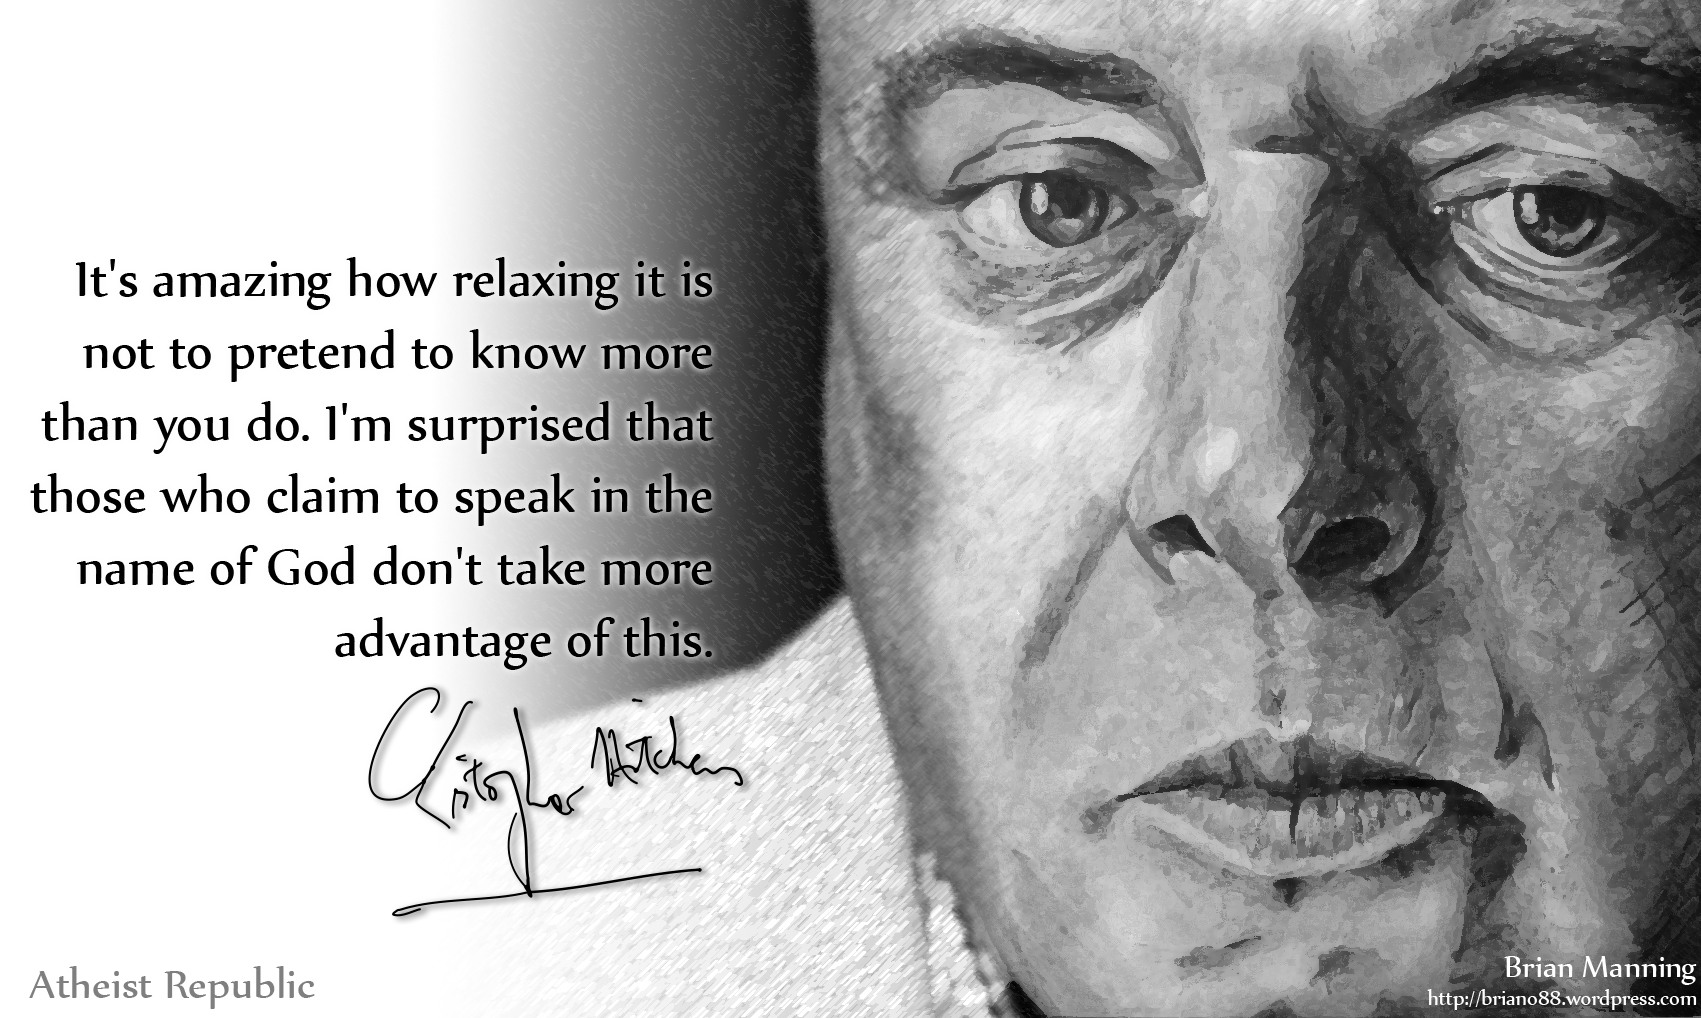 Christopher Hitchens: Not to Pretend to Know More than You Do